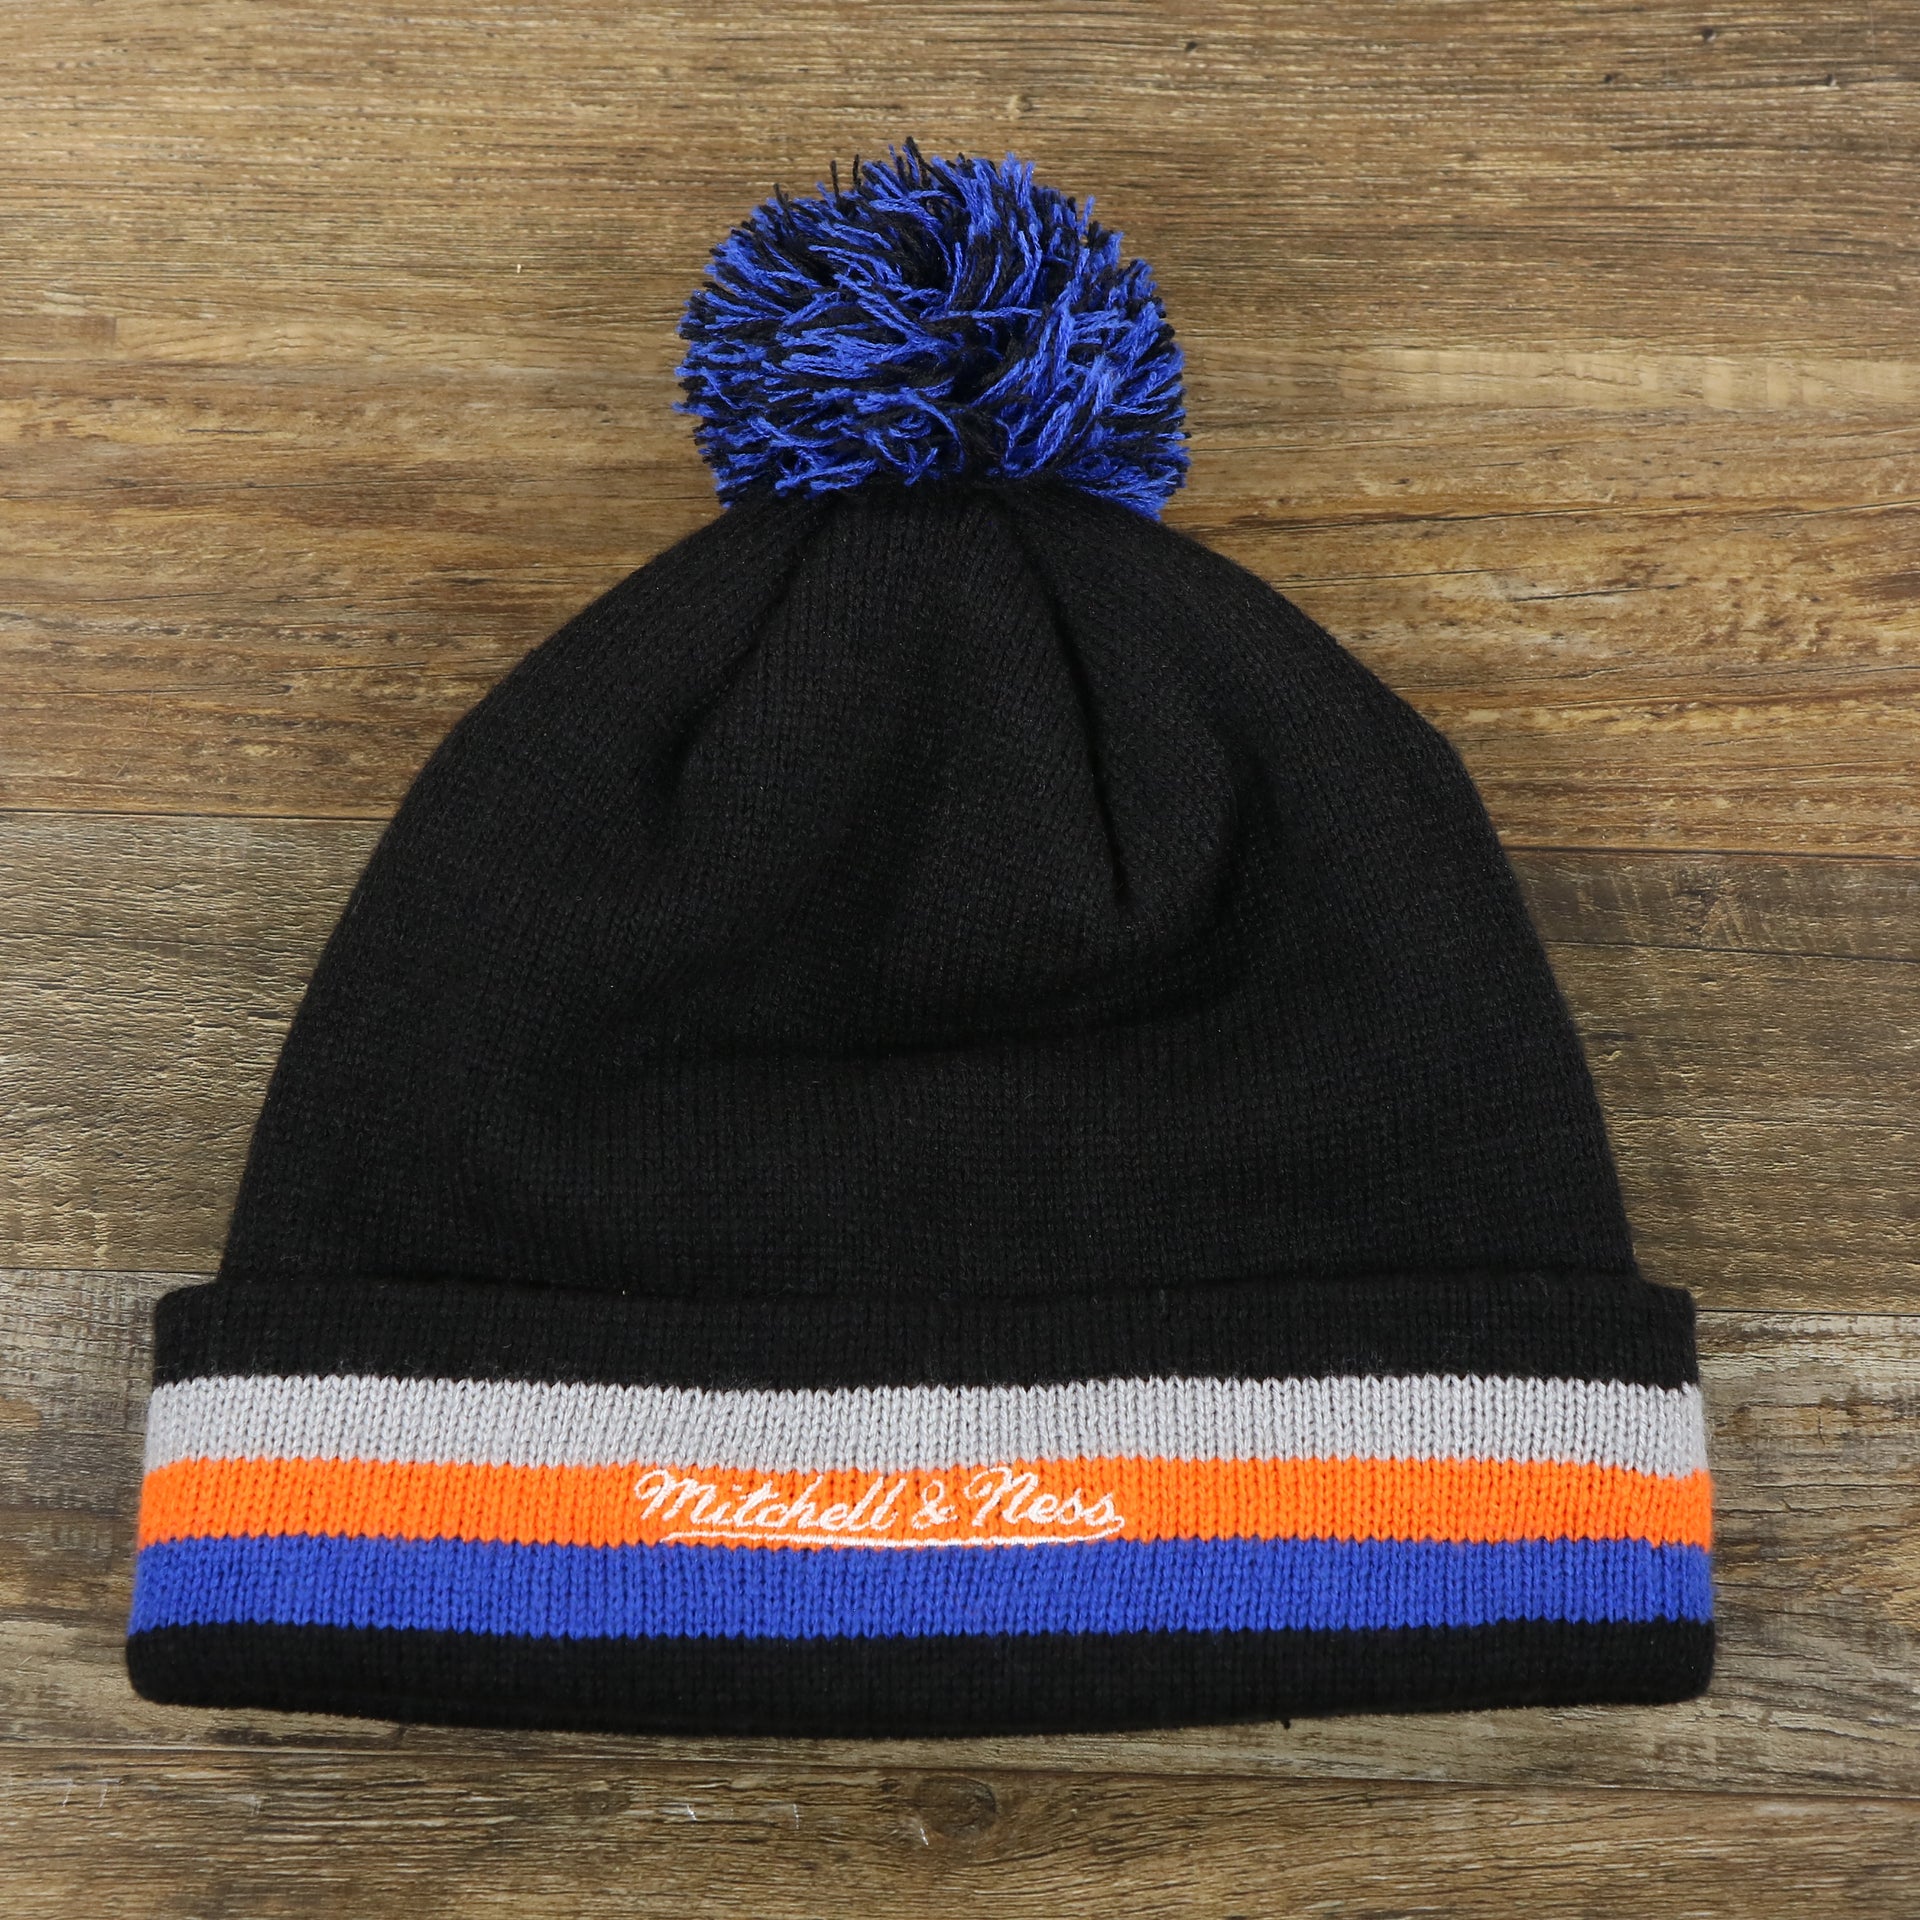 The backside of the New York Knicks Striped Cuff Black Out Blackout Knit WInter Beanie With Multi Colored Pom Pom | Black Winter Beanie